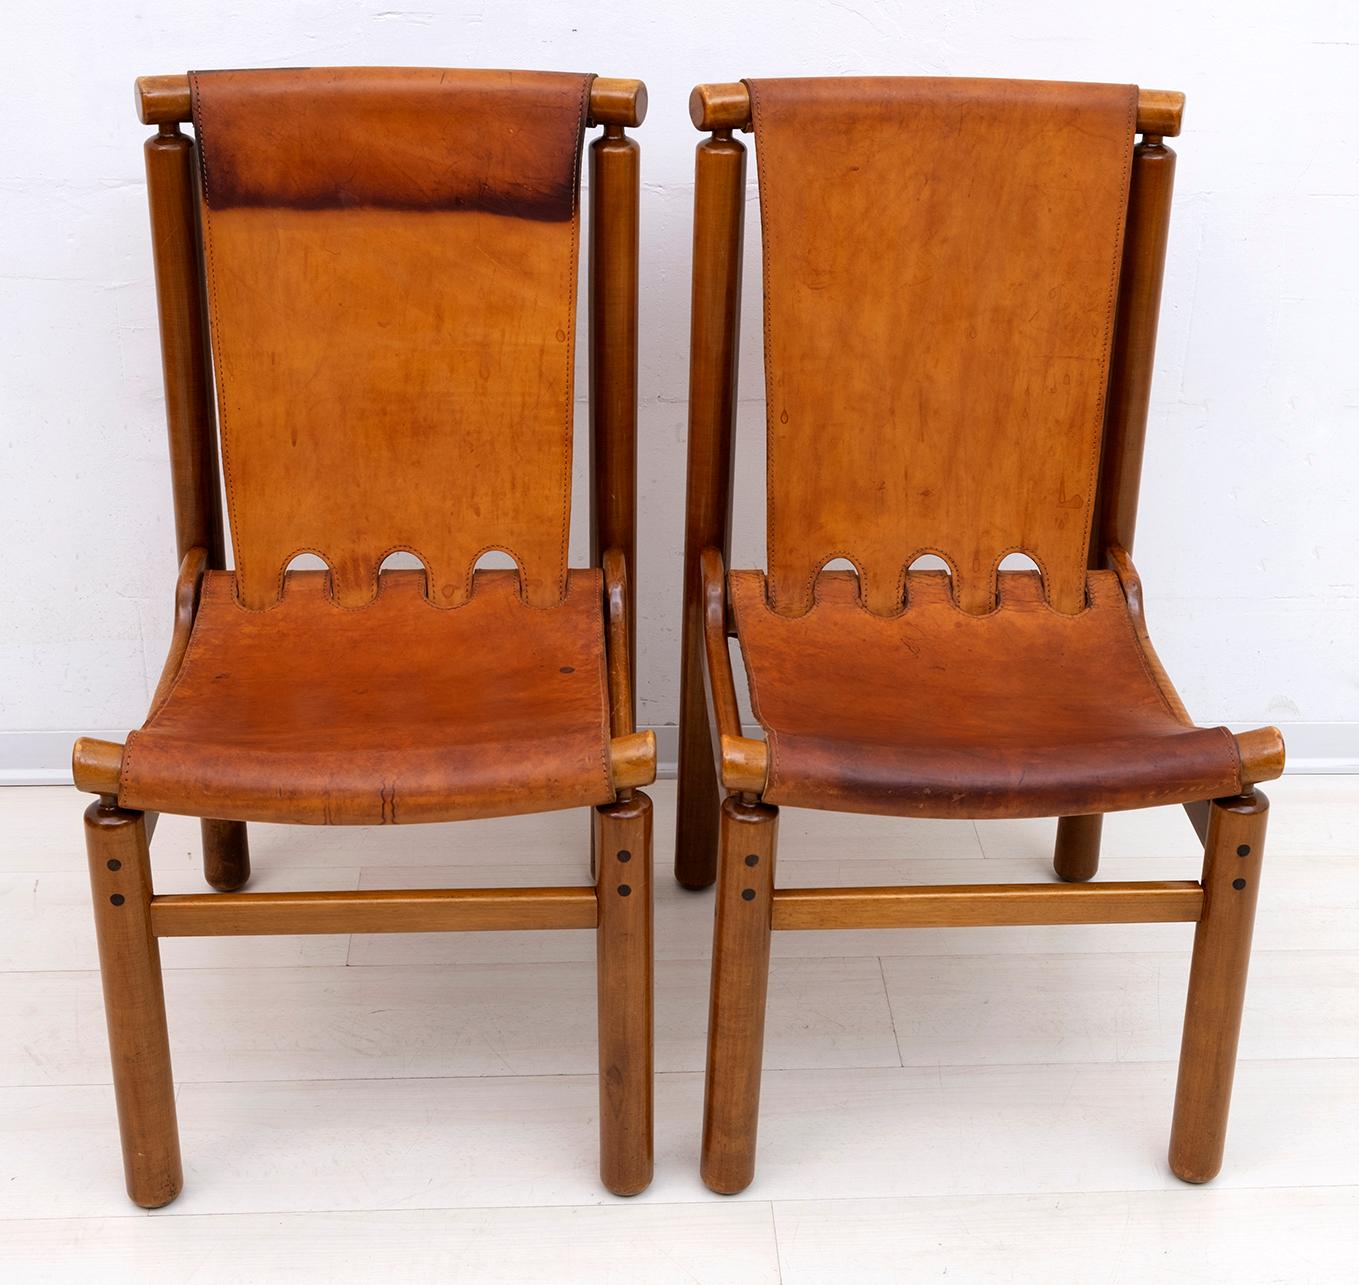 Ilmari Tapiovaara for La Permanente Mobili Cantù, light walnut stained beech and patinated cognac leather, 1950s. These sturdy chairs by Ilmari Tapiovaara have a geometric structure for the seat and back in patinated cognac leather. In addition to